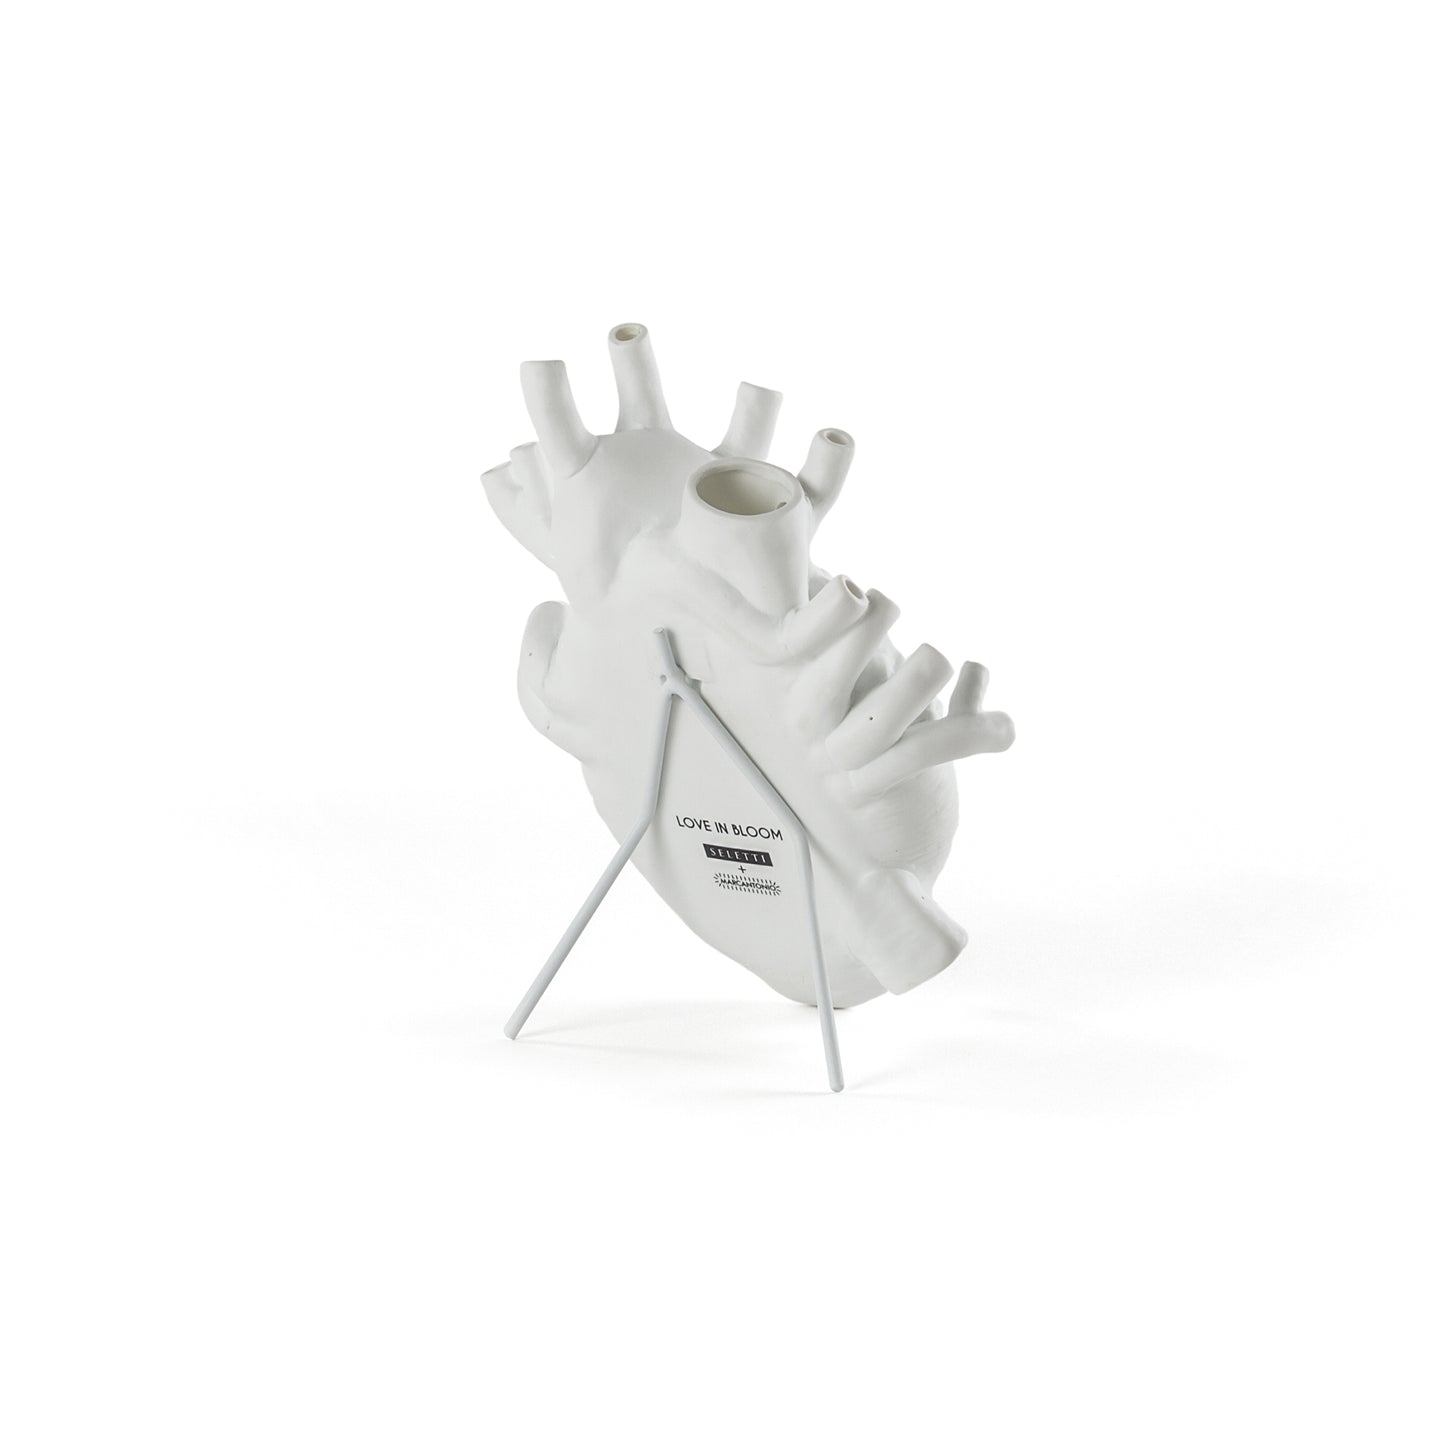 'Love in Bloom' white heart vase by Seletti. With Metal stand. 